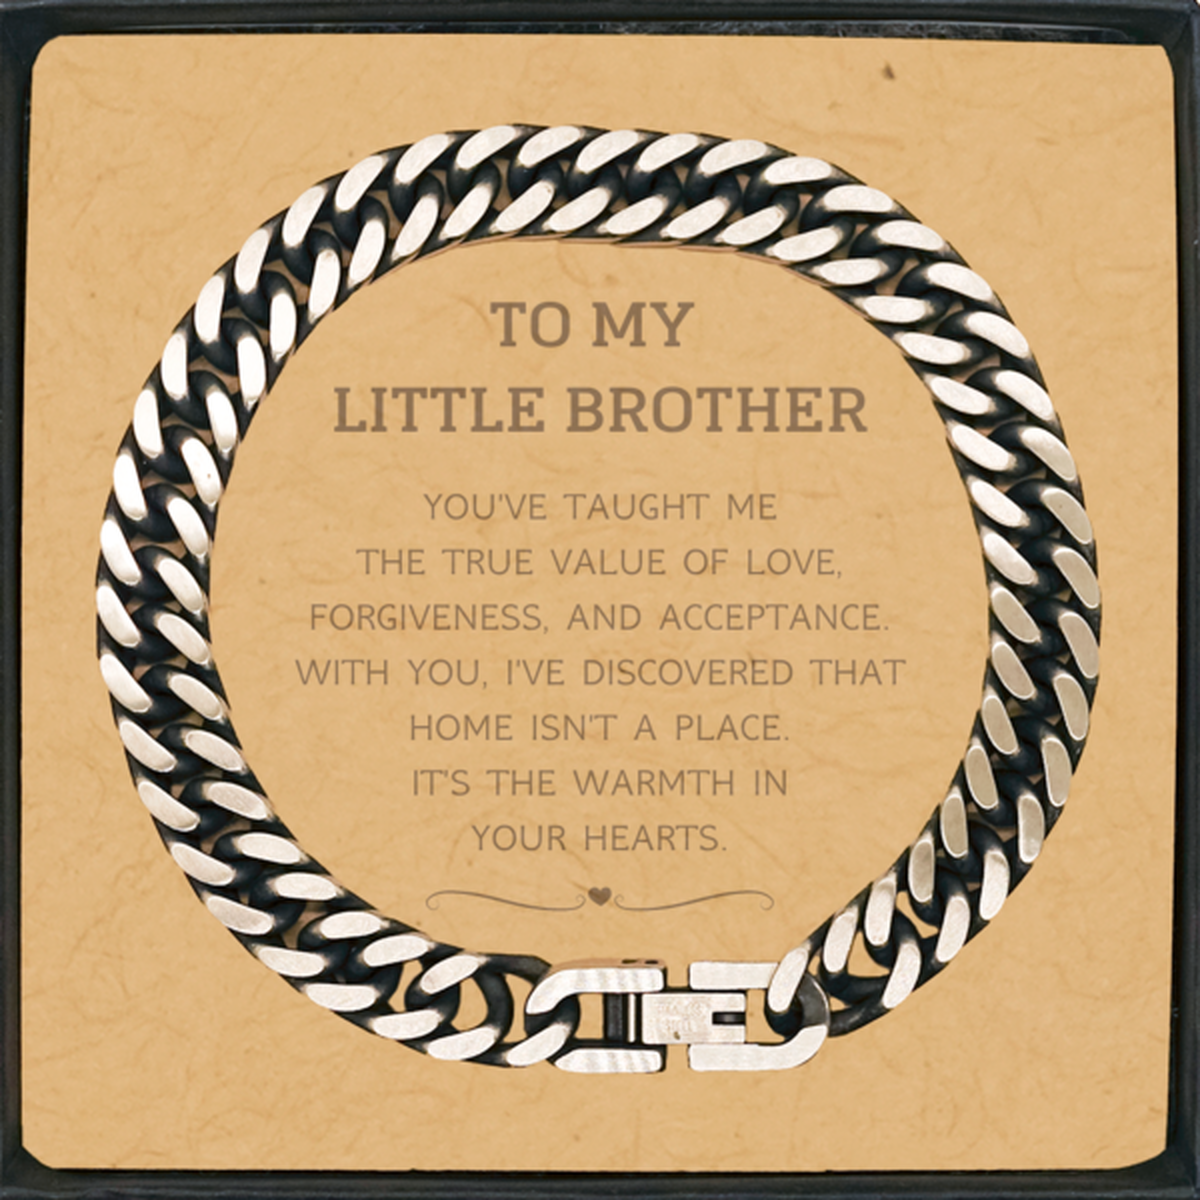 To My Little Brother Gifts, You've taught me the true value of love, Thank You Gifts For Little Brother, Birthday Cuban Link Chain Bracelet For Little Brother